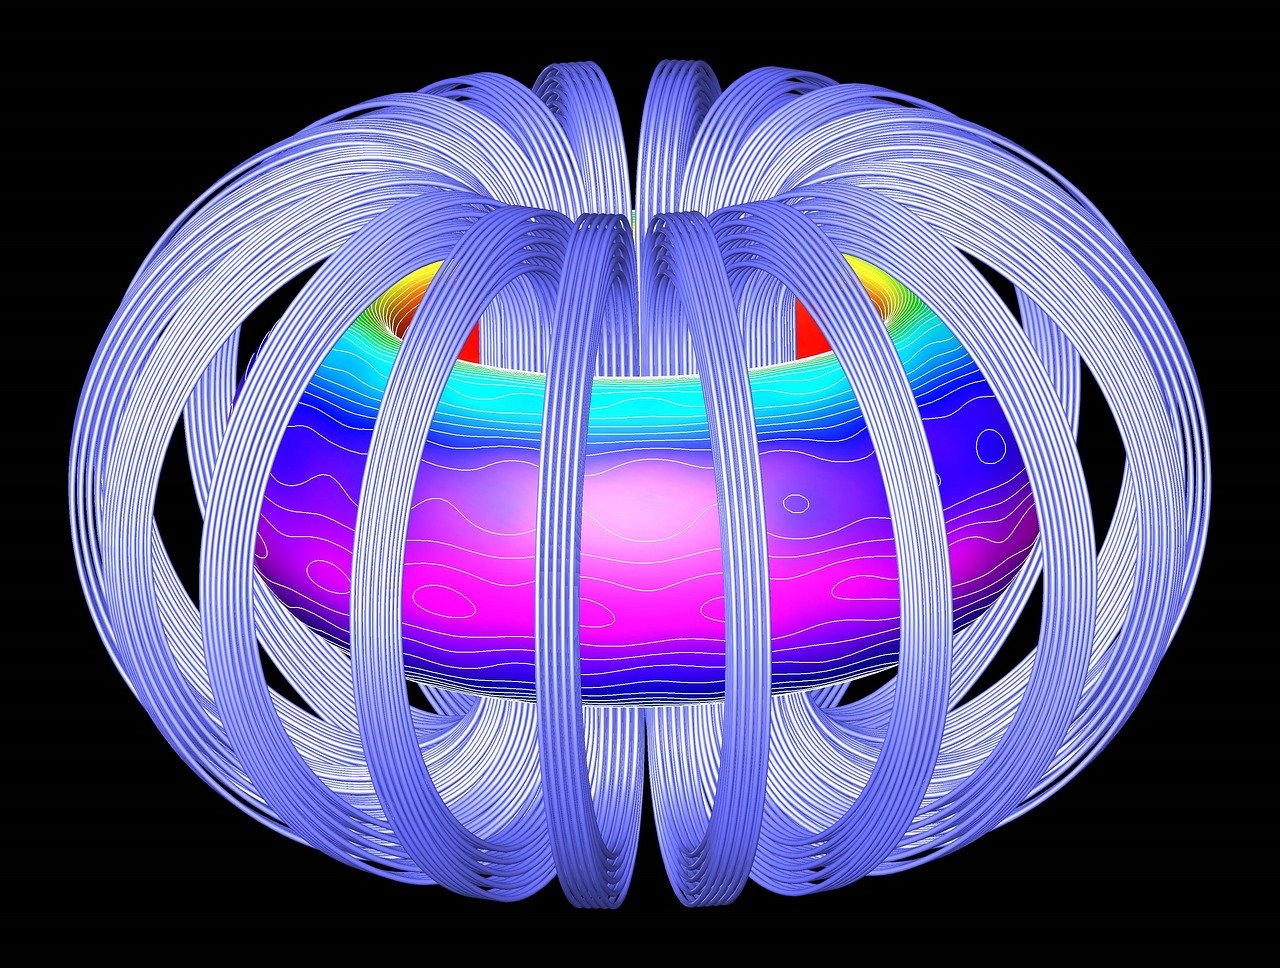 Nuclear Fusion Research Breakthrough to Accelerate Development